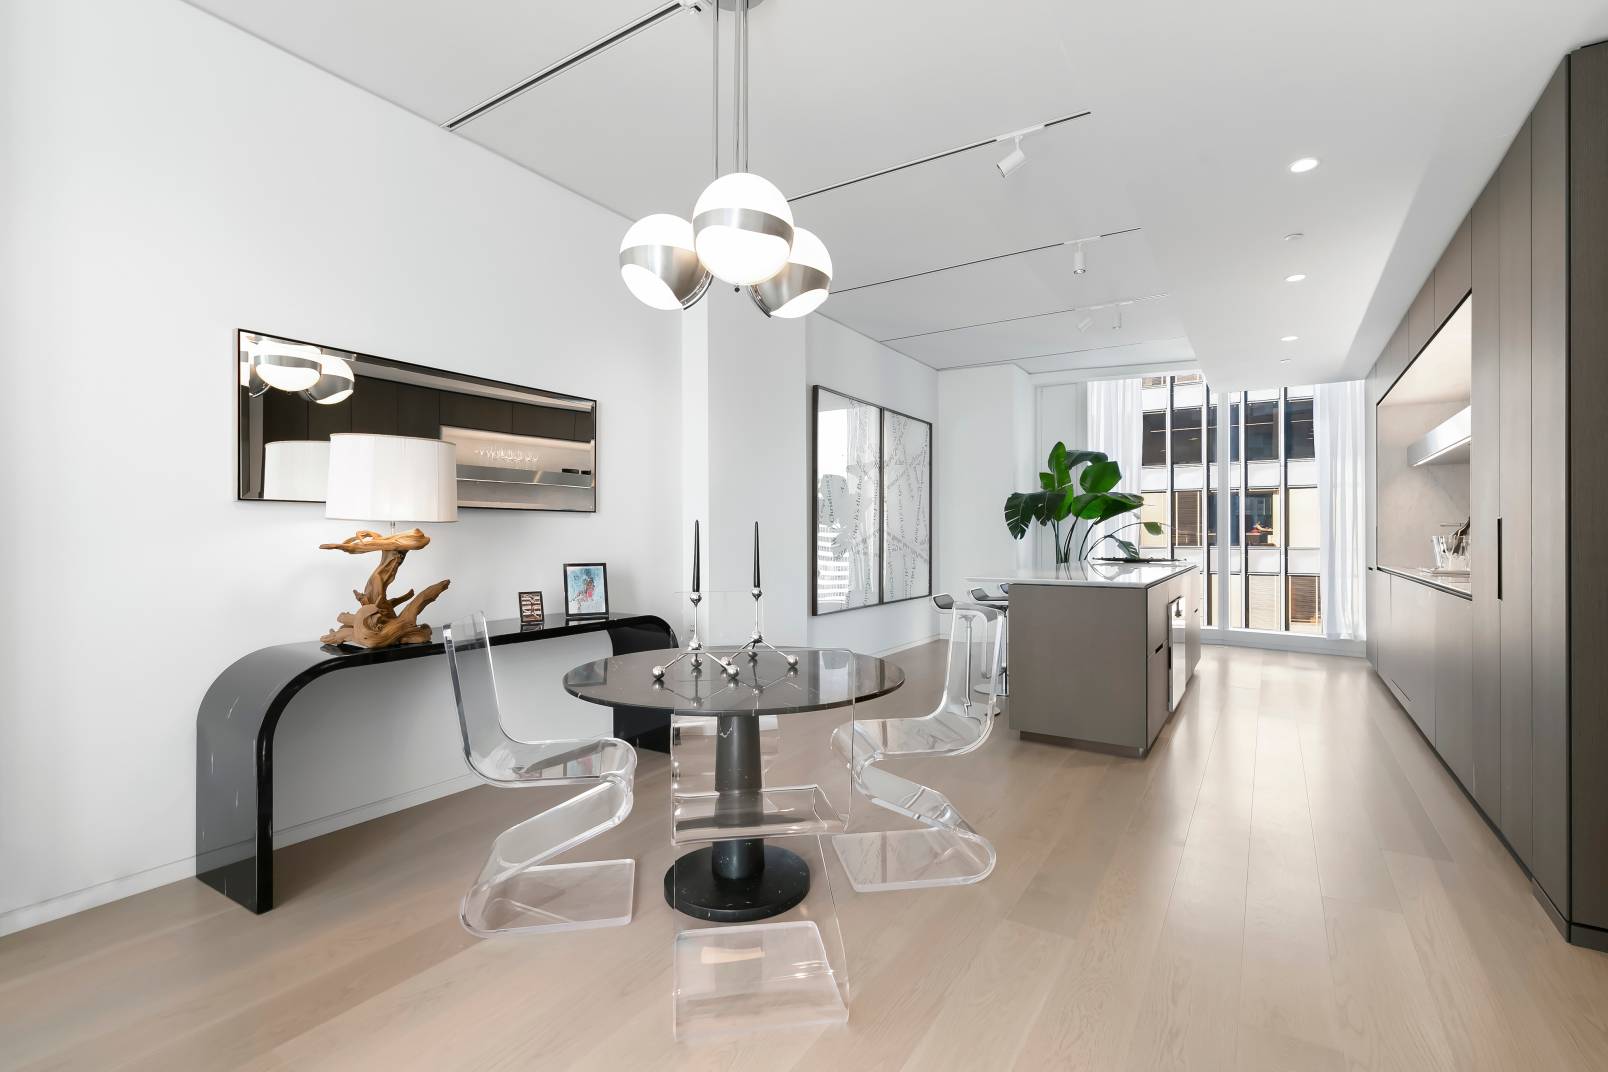 Immediate Occupancy On site Sales Gallery and Model Residences by Appointment An elegant oak entry door welcomes you to this extraordinary 1, 375 SF one bedroom residence situated in the ...